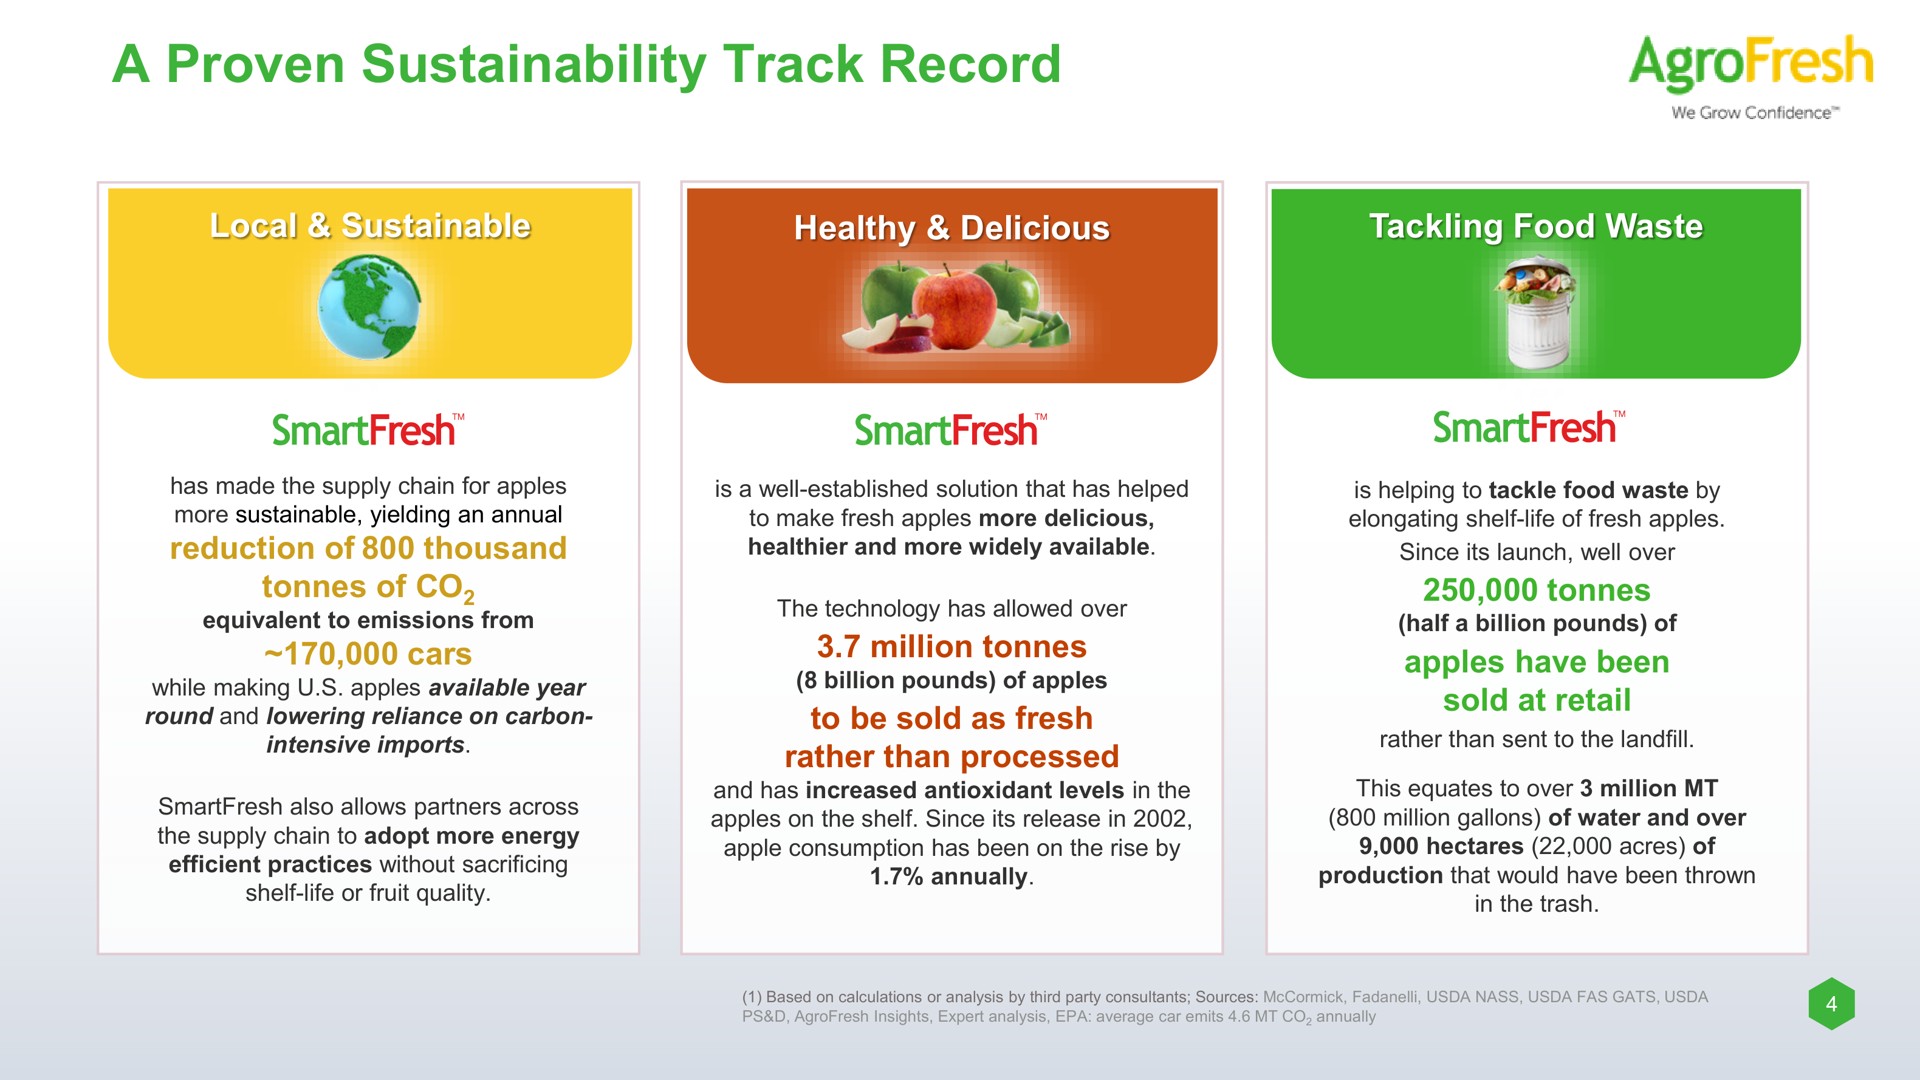 a proven track record | AgroFresh